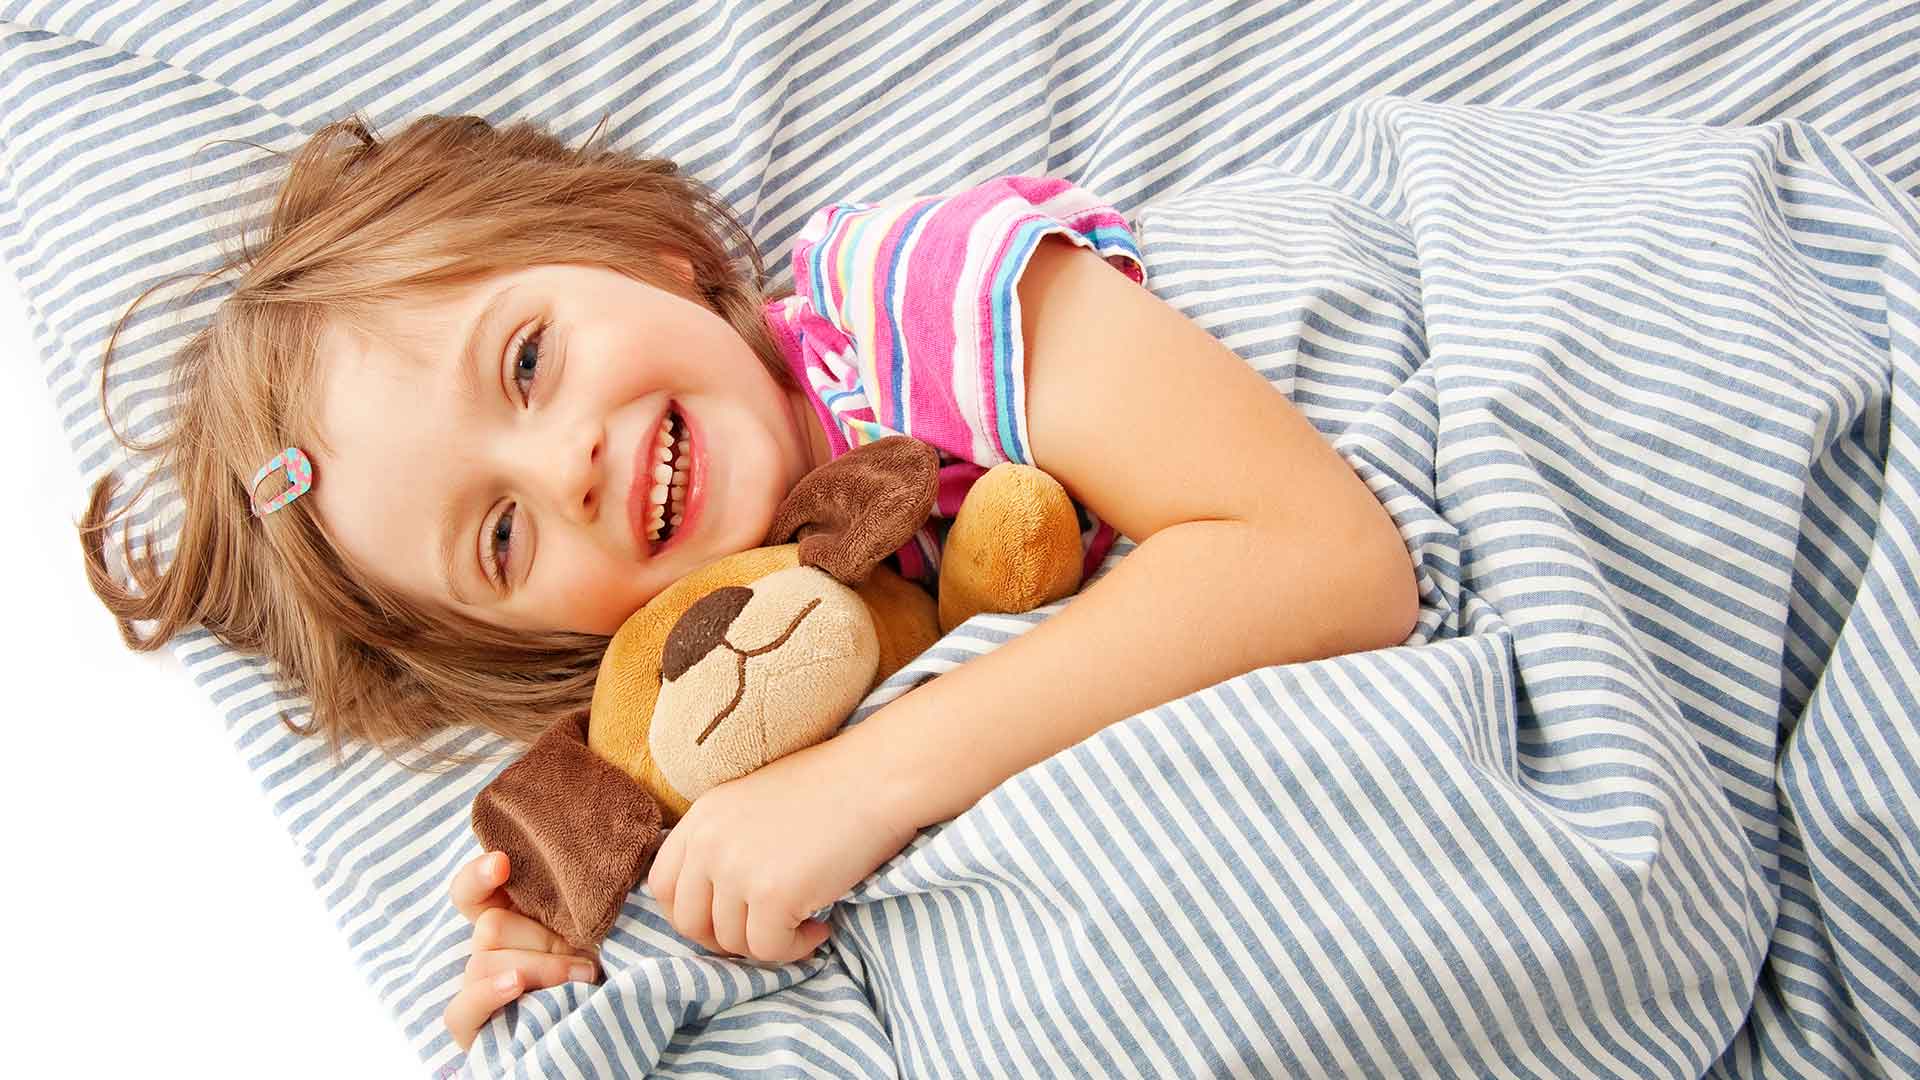 A little girl laying in bed with a teddy bear.